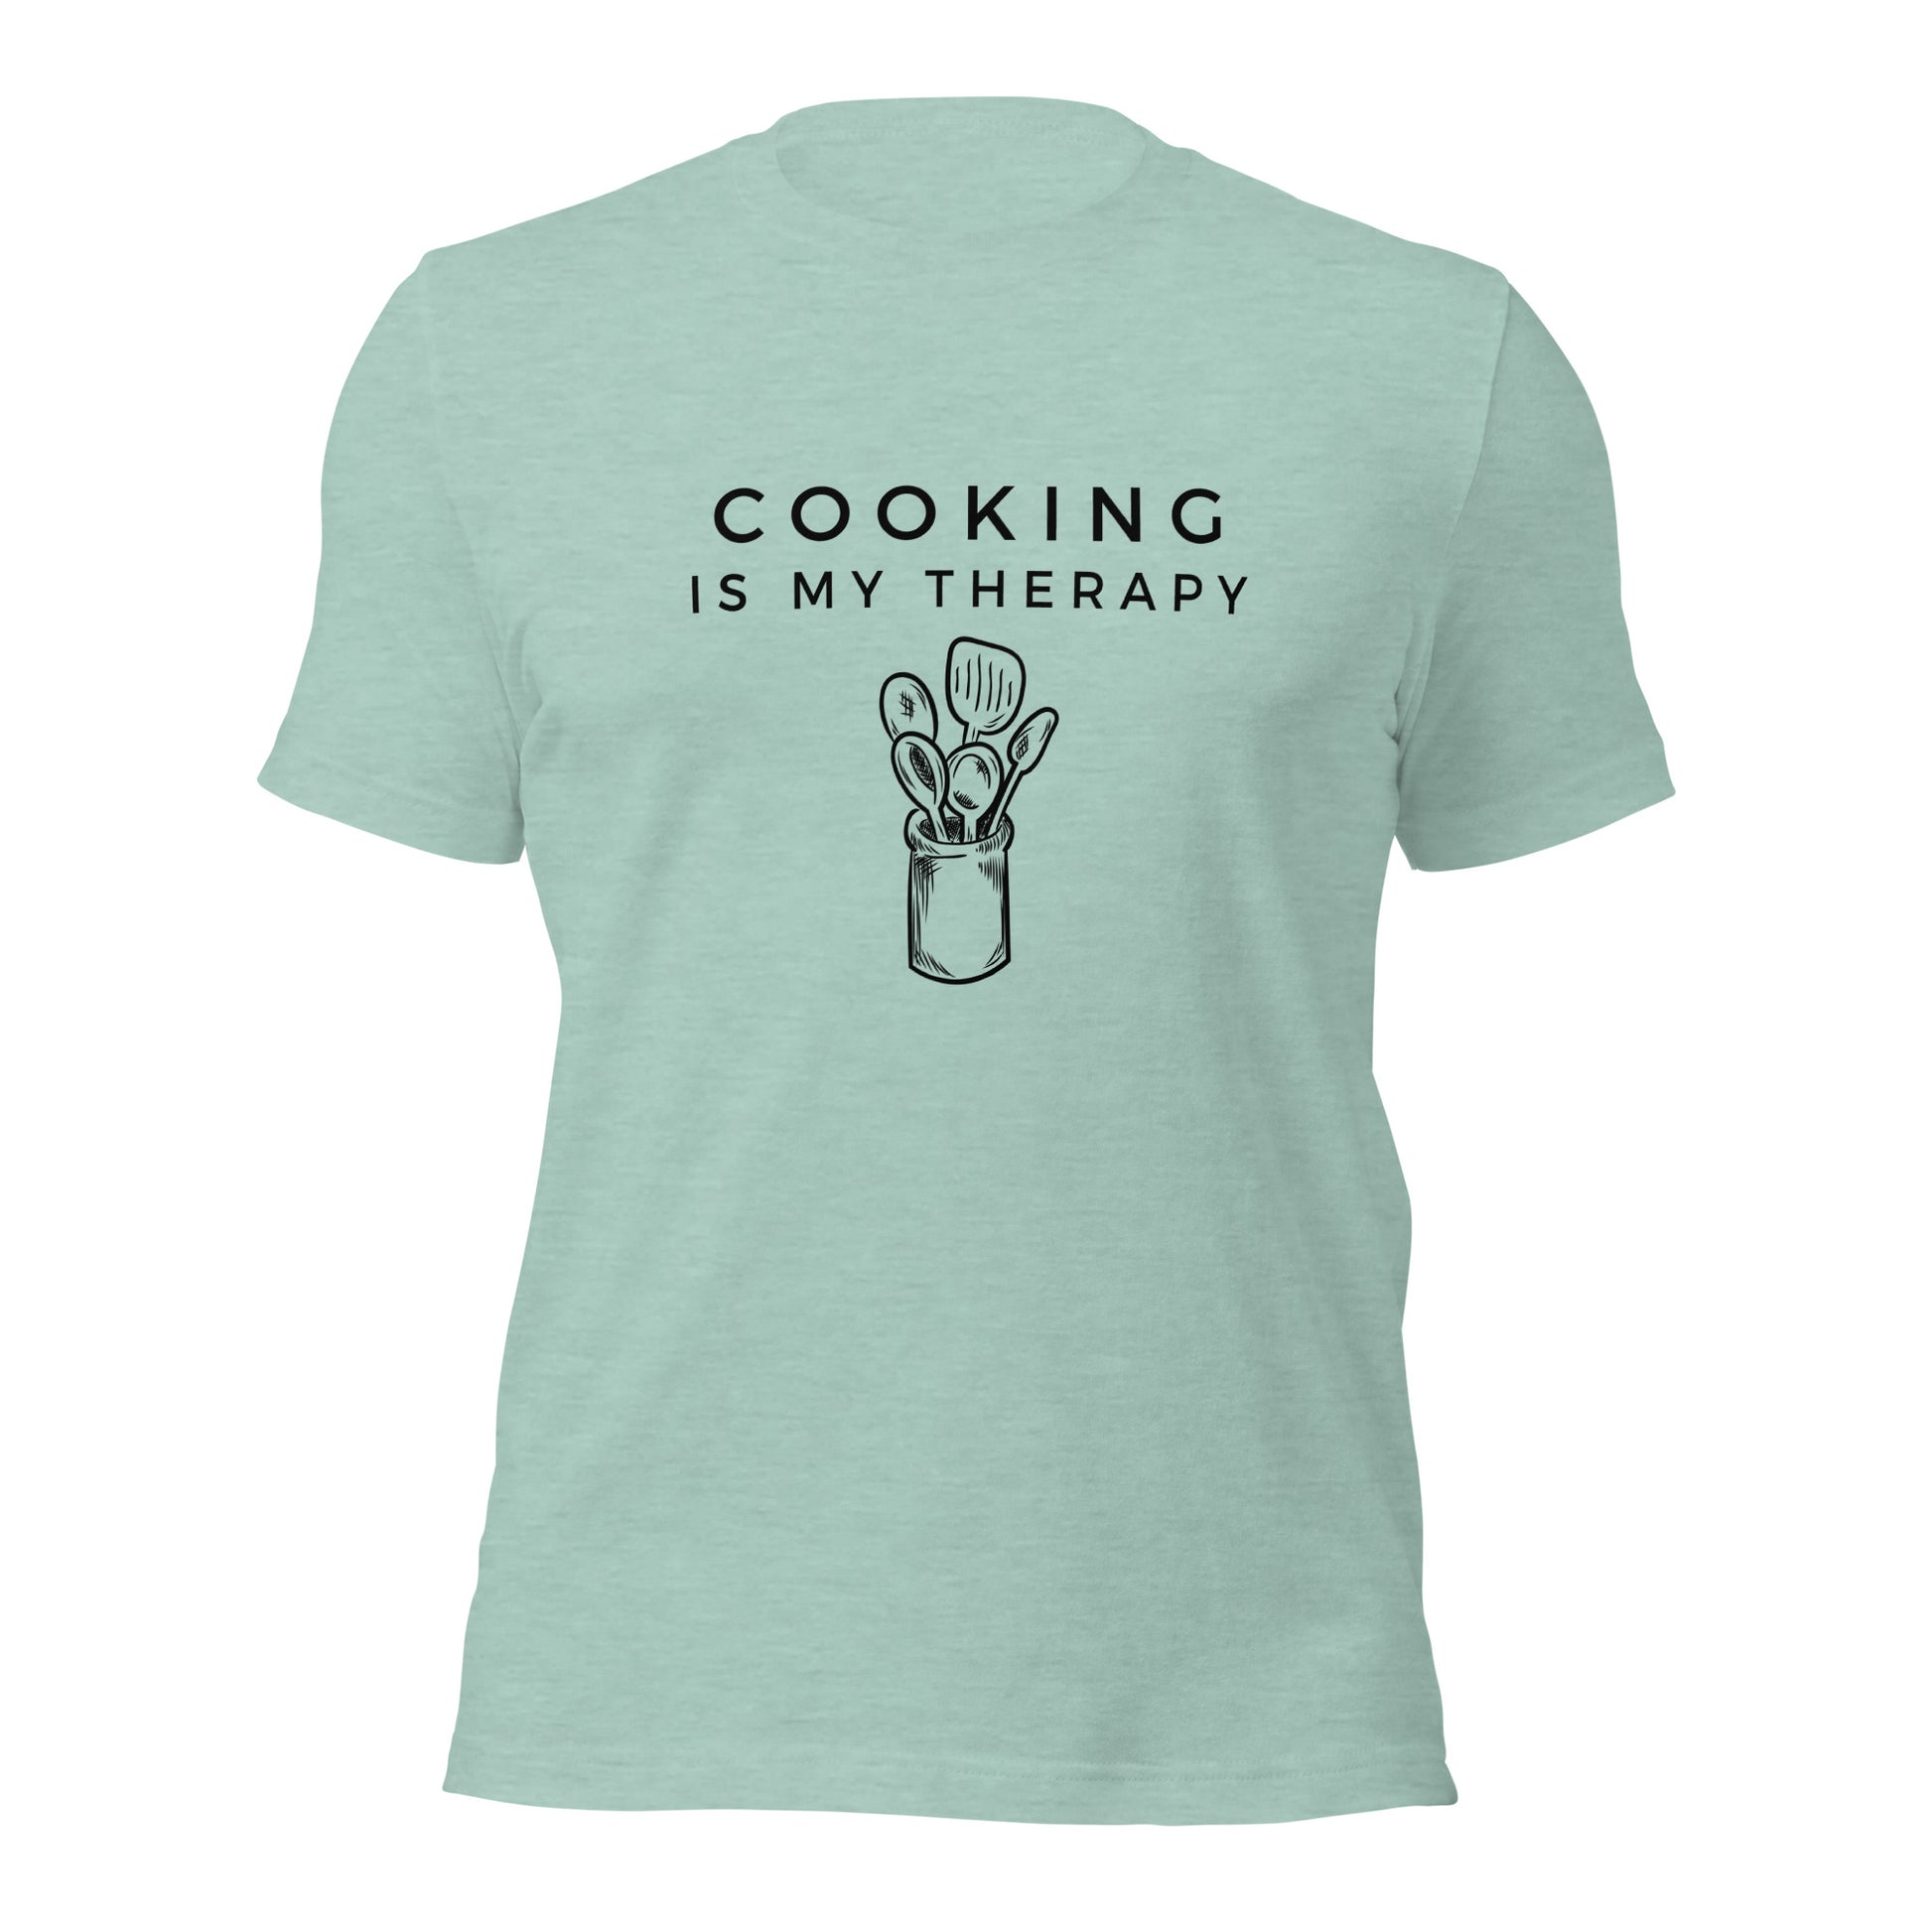 Eco-friendly on-demand cooking lover's t-shirt